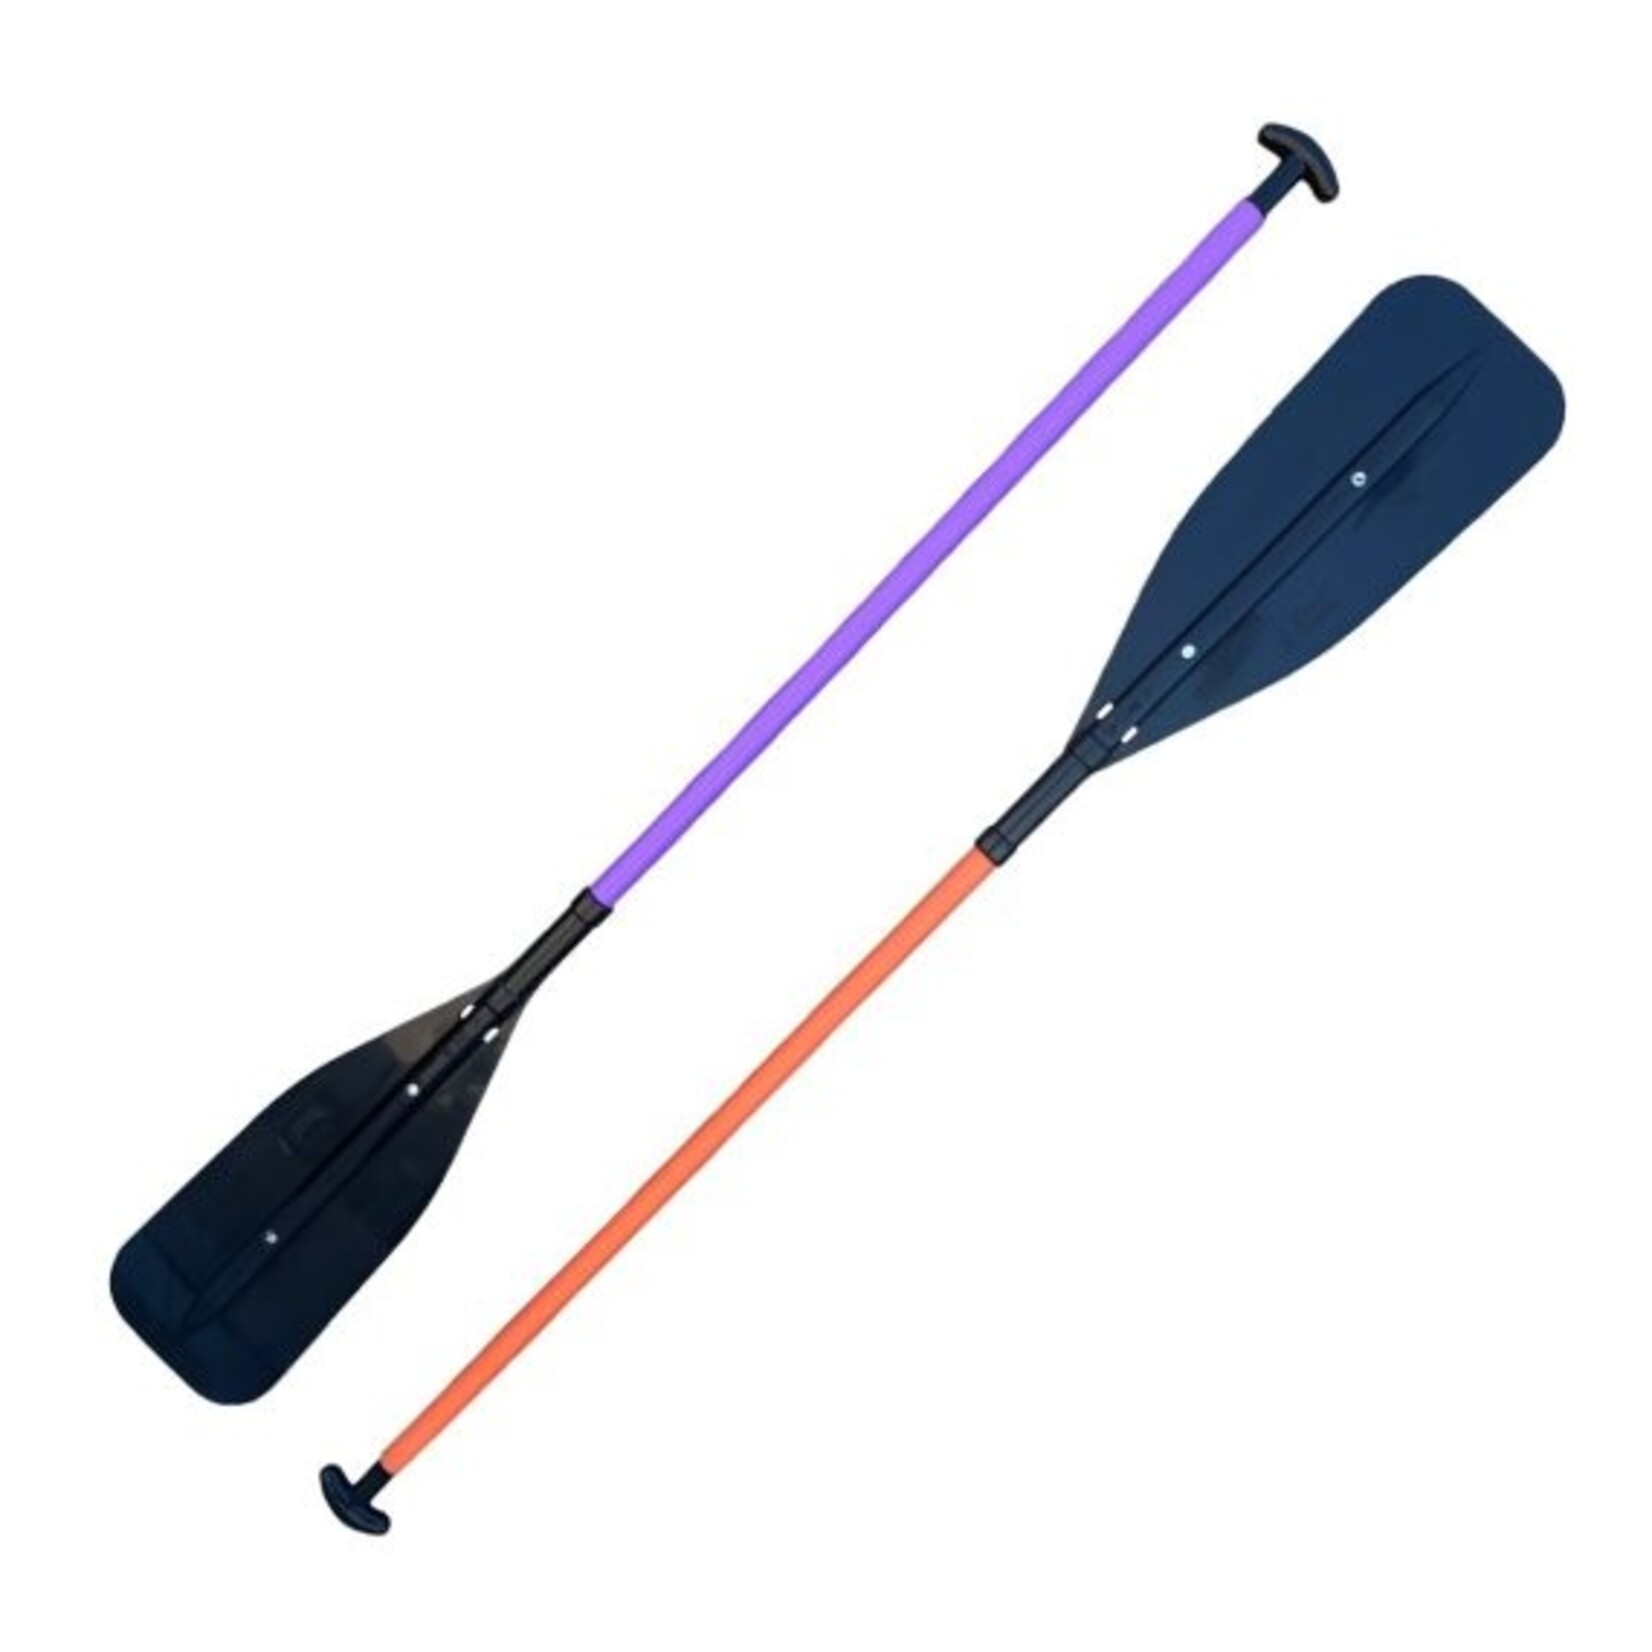 Hyside Inflatables UWG/HYSIDE Crew Paddle